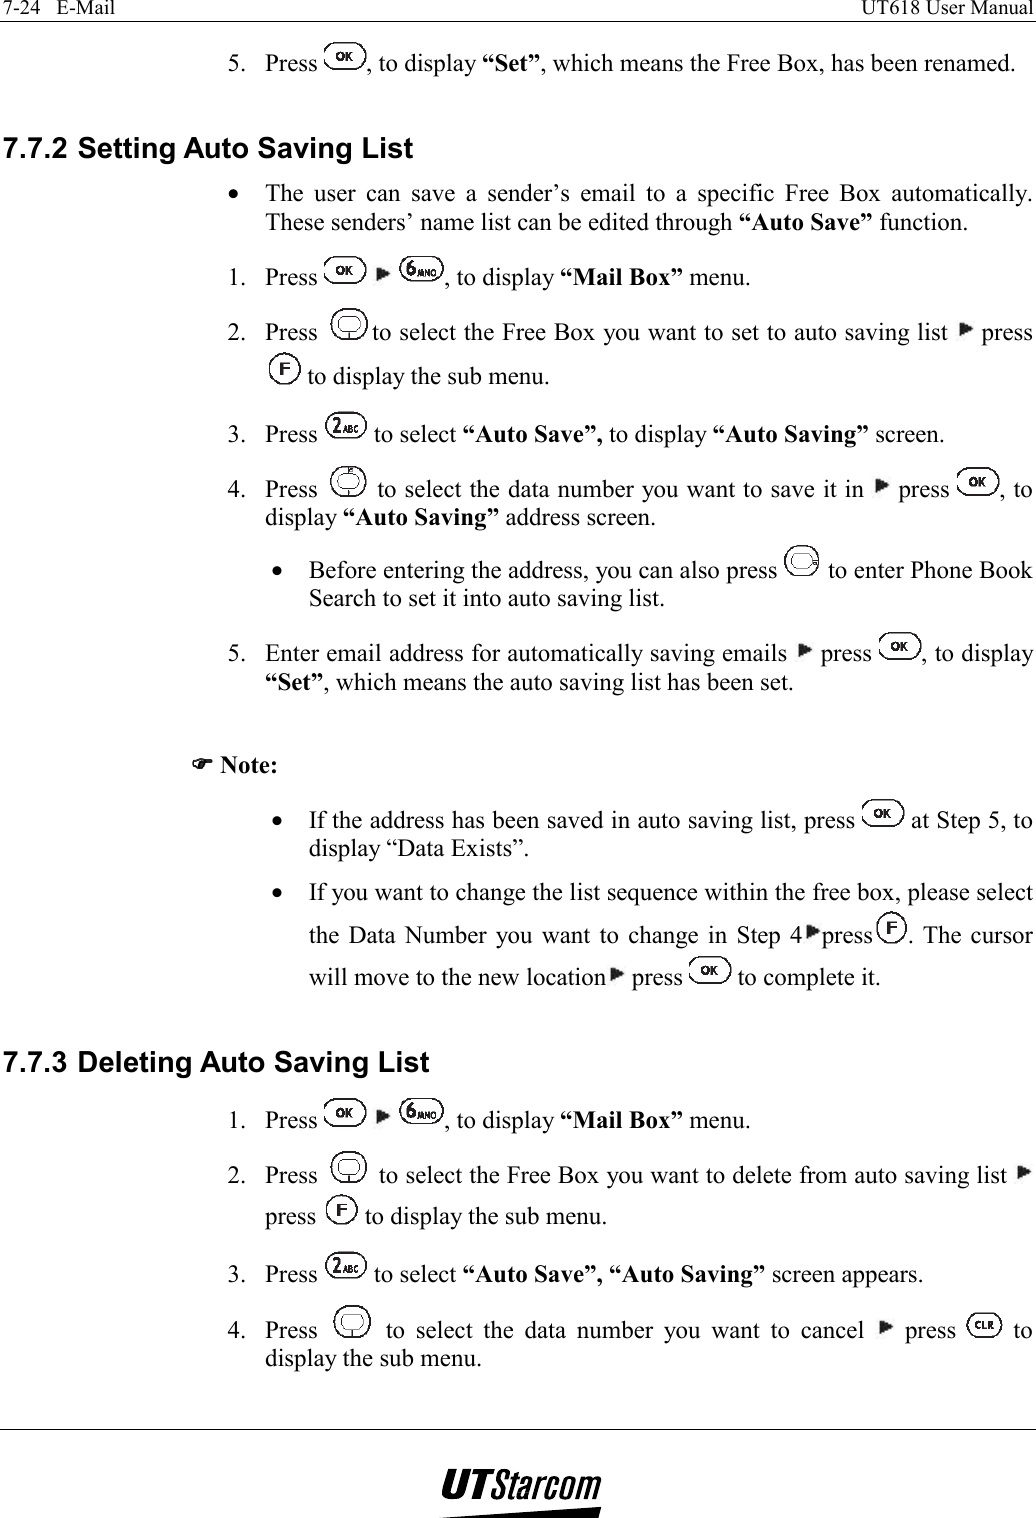 7-24   E-Mail    UT618 User Manual   5. Press  , to display “Set”, which means the Free Box, has been renamed.  7.7.2 Setting Auto Saving List •  The user can save a sender’s email to a specific Free Box automatically. These senders’ name list can be edited through “Auto Save” function. 1. Press      , to display “Mail Box” menu. 2. Press  to select the Free Box you want to set to auto saving list   press  to display the sub menu. 3. Press   to select “Auto Save”, to display “Auto Saving” screen. 4. Press   to select the data number you want to save it in   press  , to display “Auto Saving” address screen. •  Before entering the address, you can also press   to enter Phone Book Search to set it into auto saving list. 5.  Enter email address for automatically saving emails   press  , to display “Set”, which means the auto saving list has been set.  )))) Note: •  If the address has been saved in auto saving list, press   at Step 5, to display “Data Exists”. •  If you want to change the list sequence within the free box, please select the Data Number you want to change in Step 4 press . The cursor will move to the new location  press   to complete it.  7.7.3 Deleting Auto Saving List 1. Press      , to display “Mail Box” menu. 2. Press   to select the Free Box you want to delete from auto saving list   press   to display the sub menu. 3. Press   to select “Auto Save”, “Auto Saving” screen appears. 4. Press   to select the data number you want to cancel   press   to display the sub menu. 